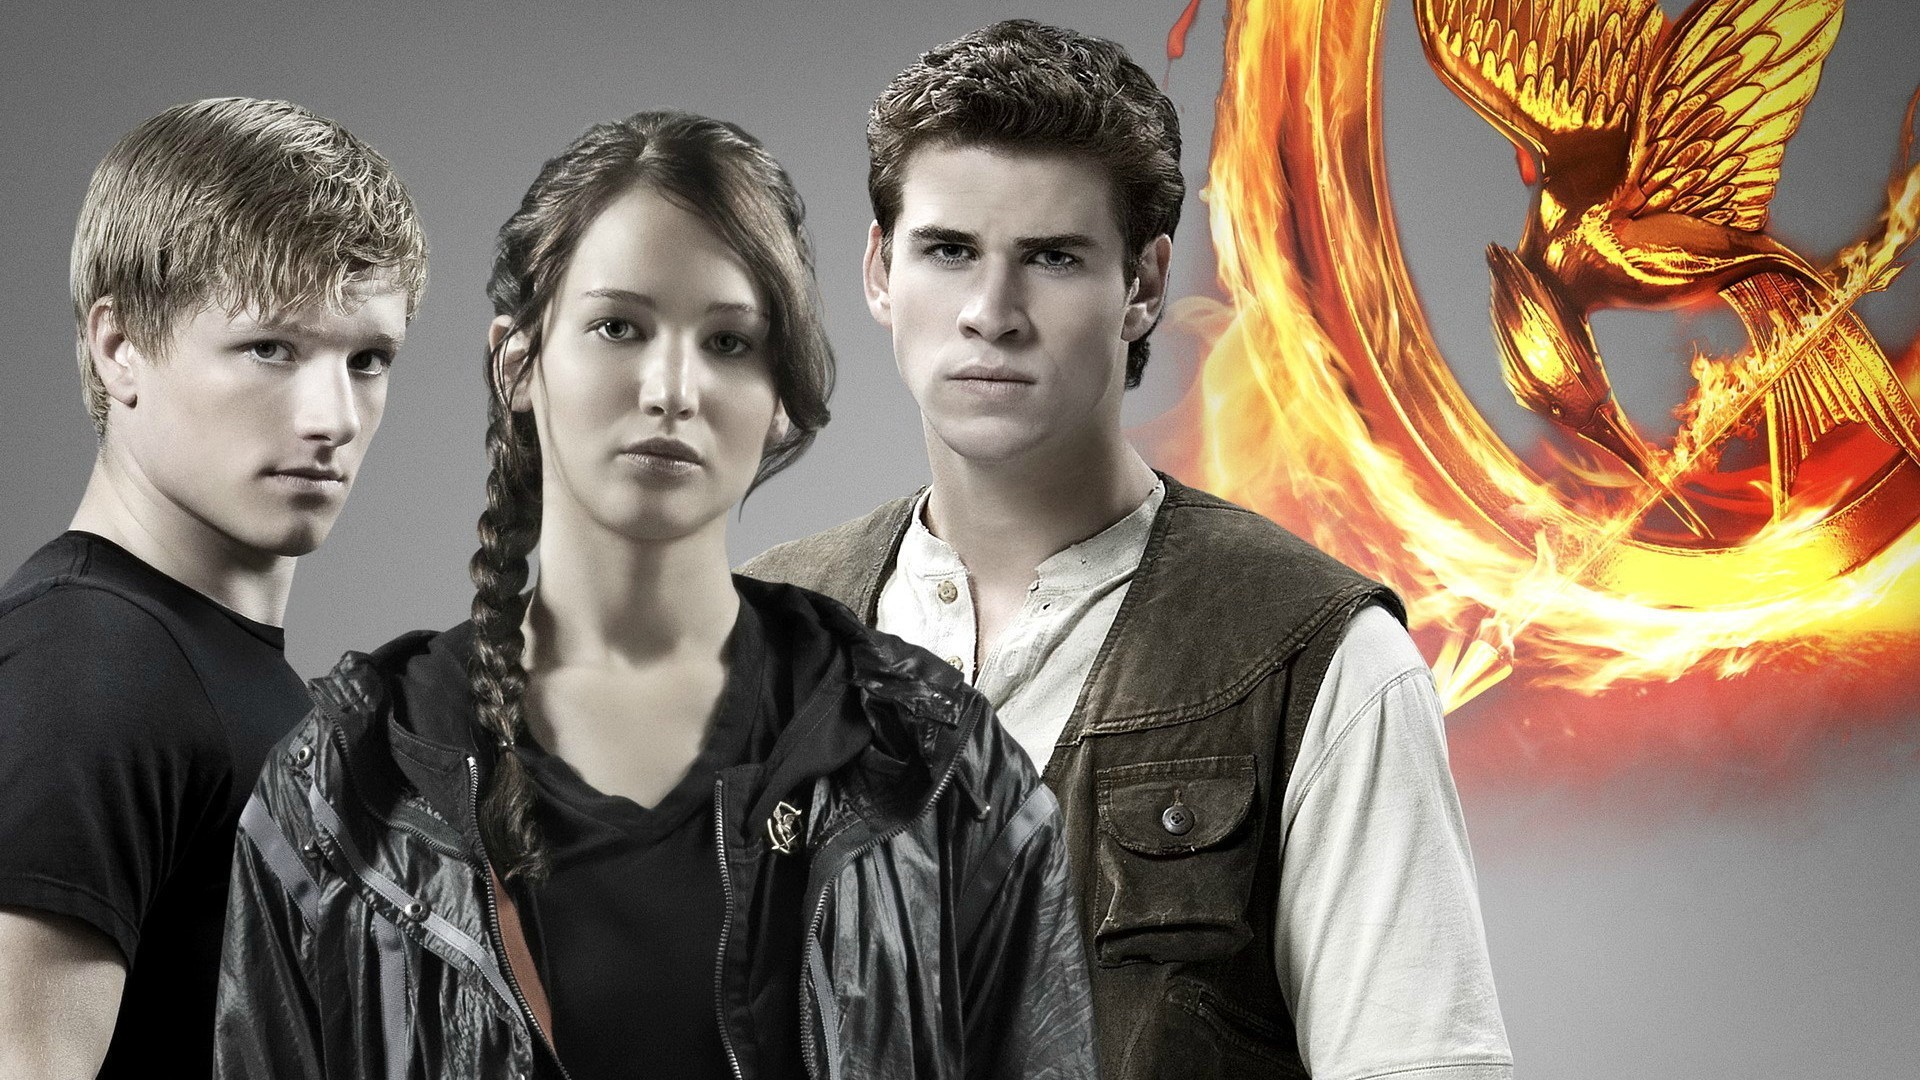 People 1920x1080 movies The Hunger Games Jennifer Lawrence Liam Hemsworth looking at viewer Katniss Everdeen women actress actor Josh Hutcherson